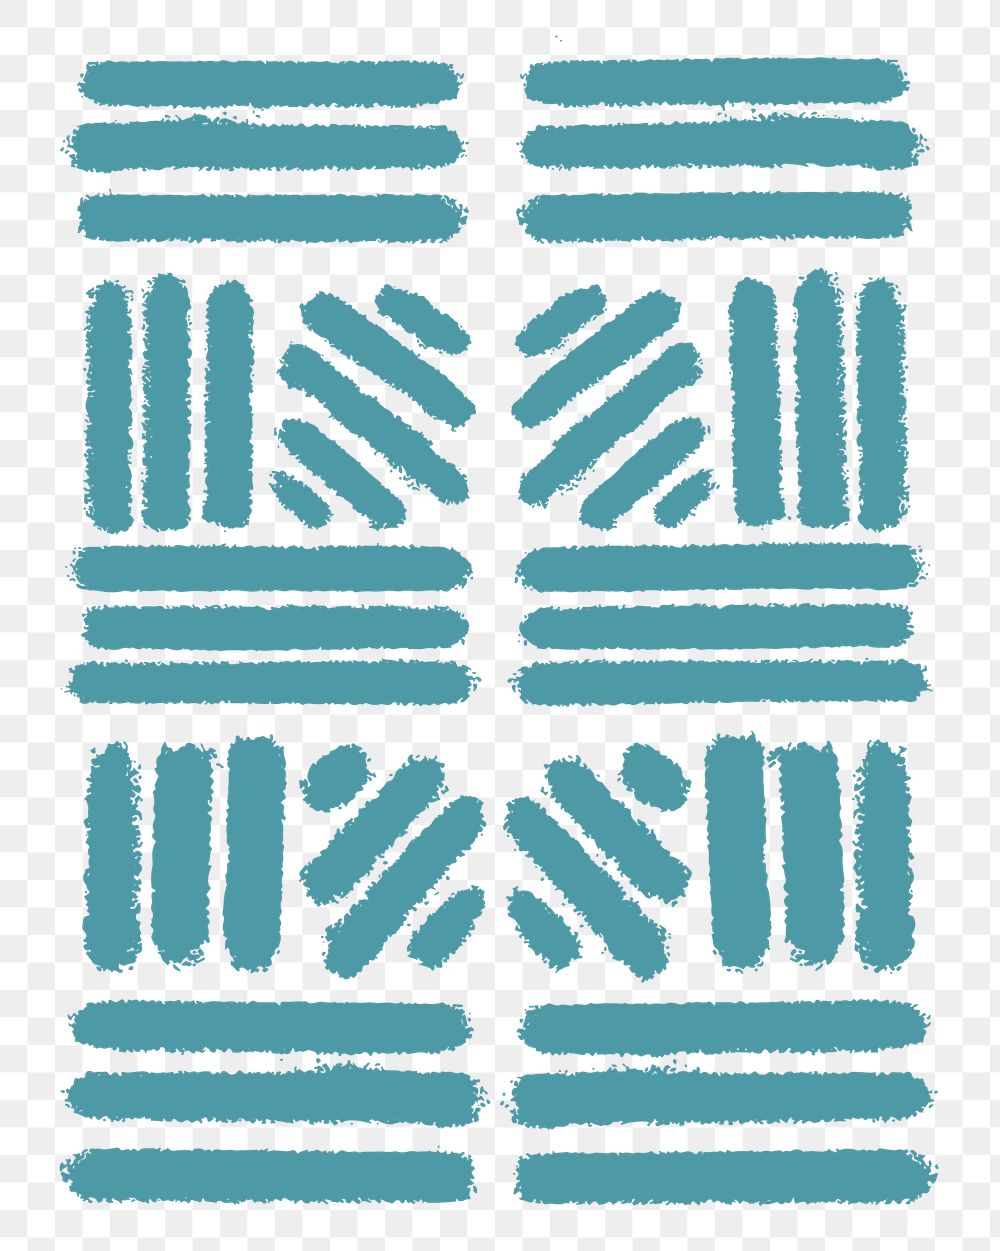 Stripes PNG collage element, blue simple graphic